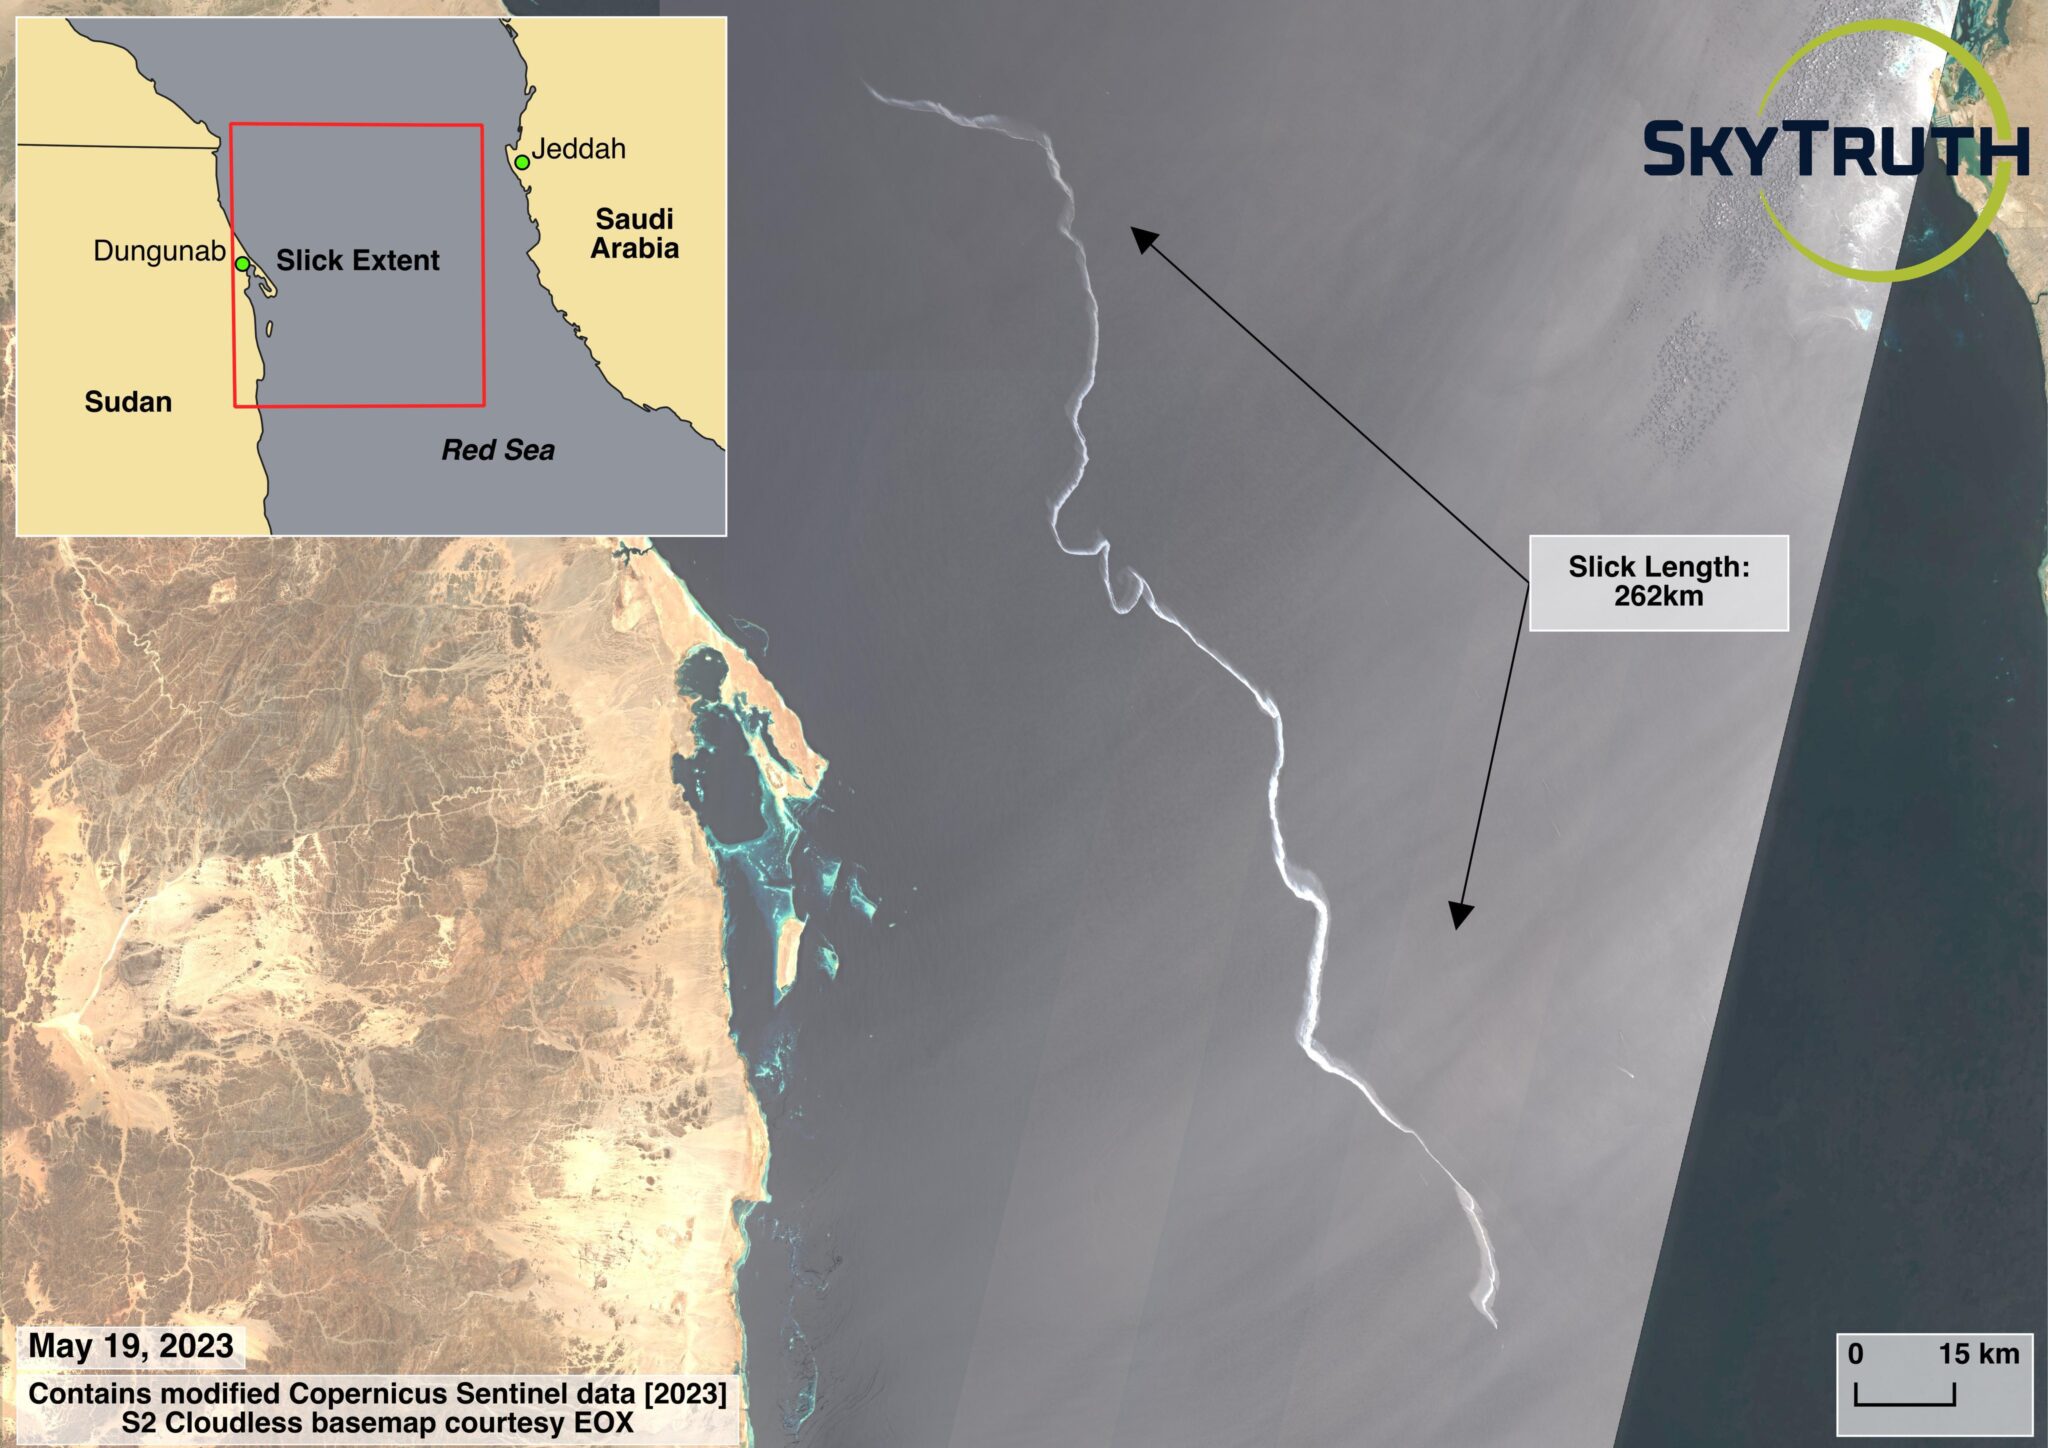 Ship Suspected of 150-Mile-Long Oil Slick in Red Sea